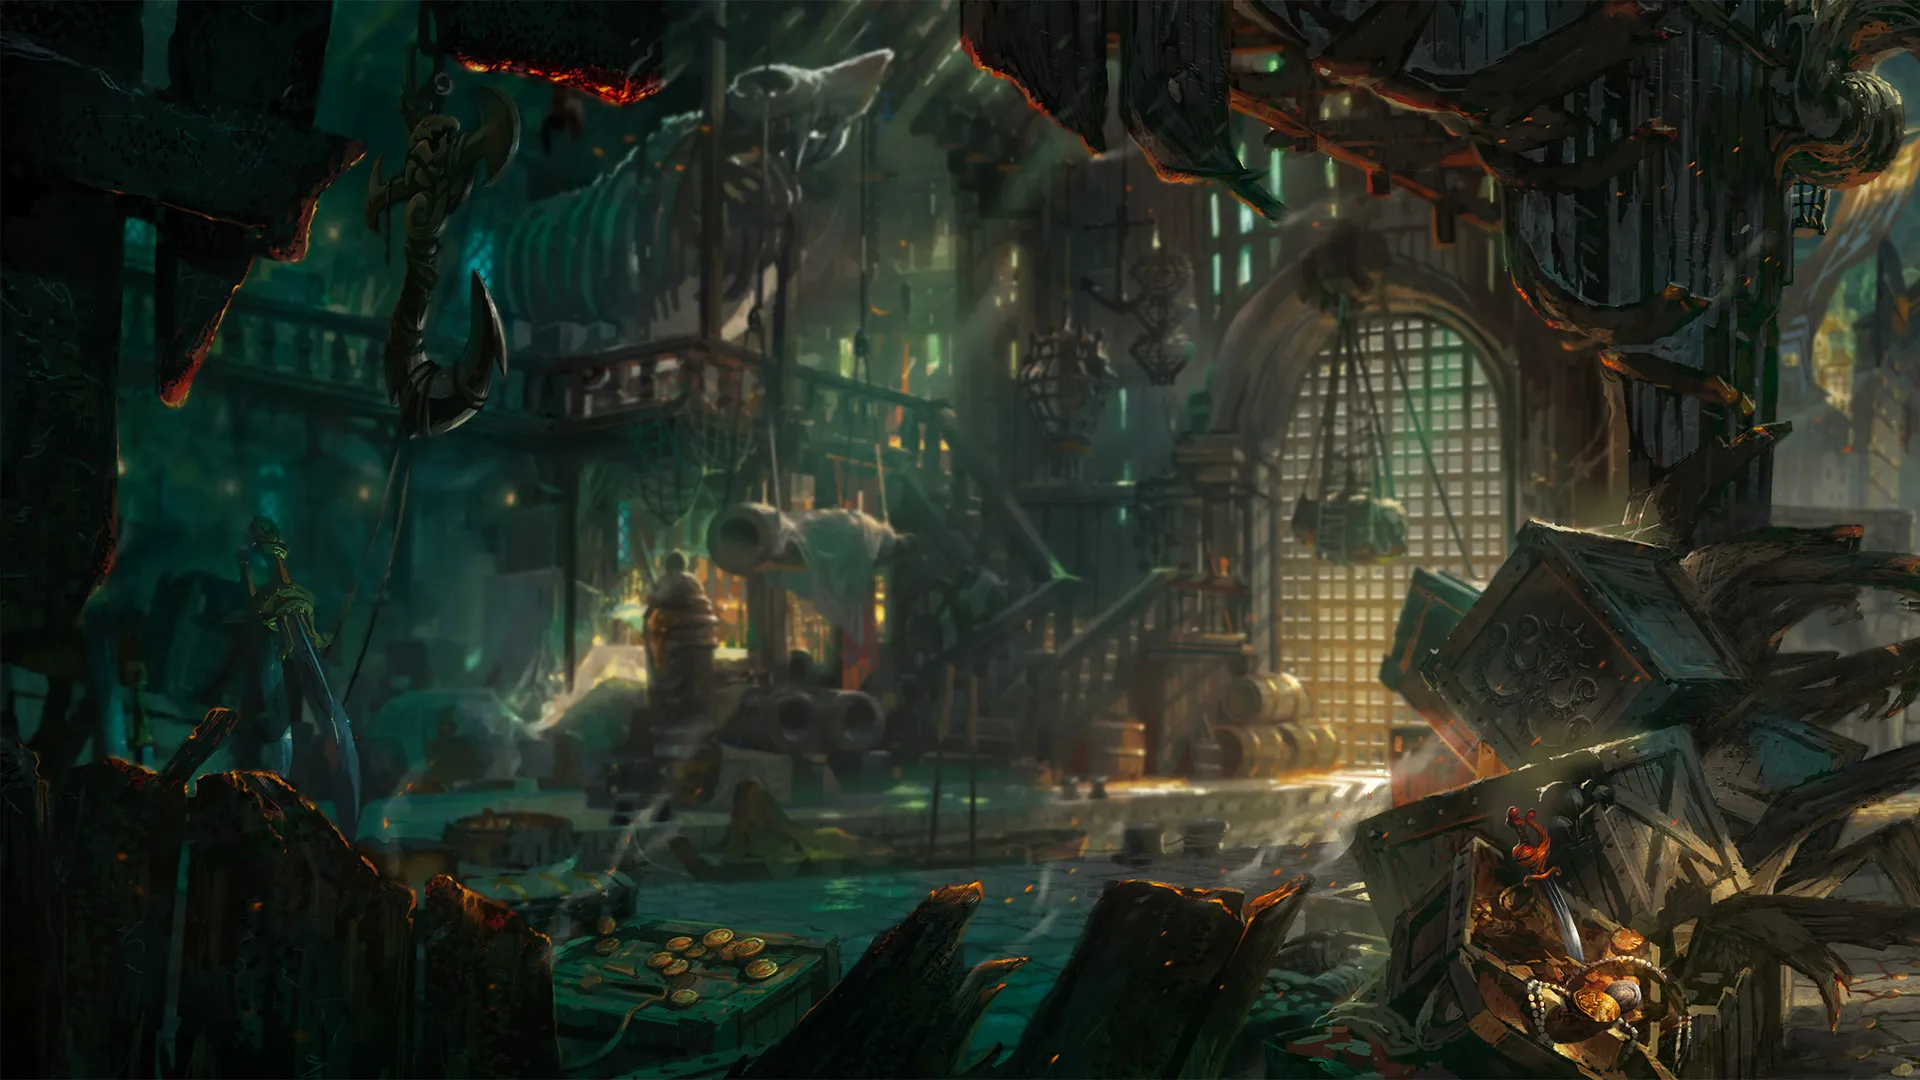 Bilgewater Event in League of Legends' key art -- a harbor shown in dark green coloring from the view of an interior cave